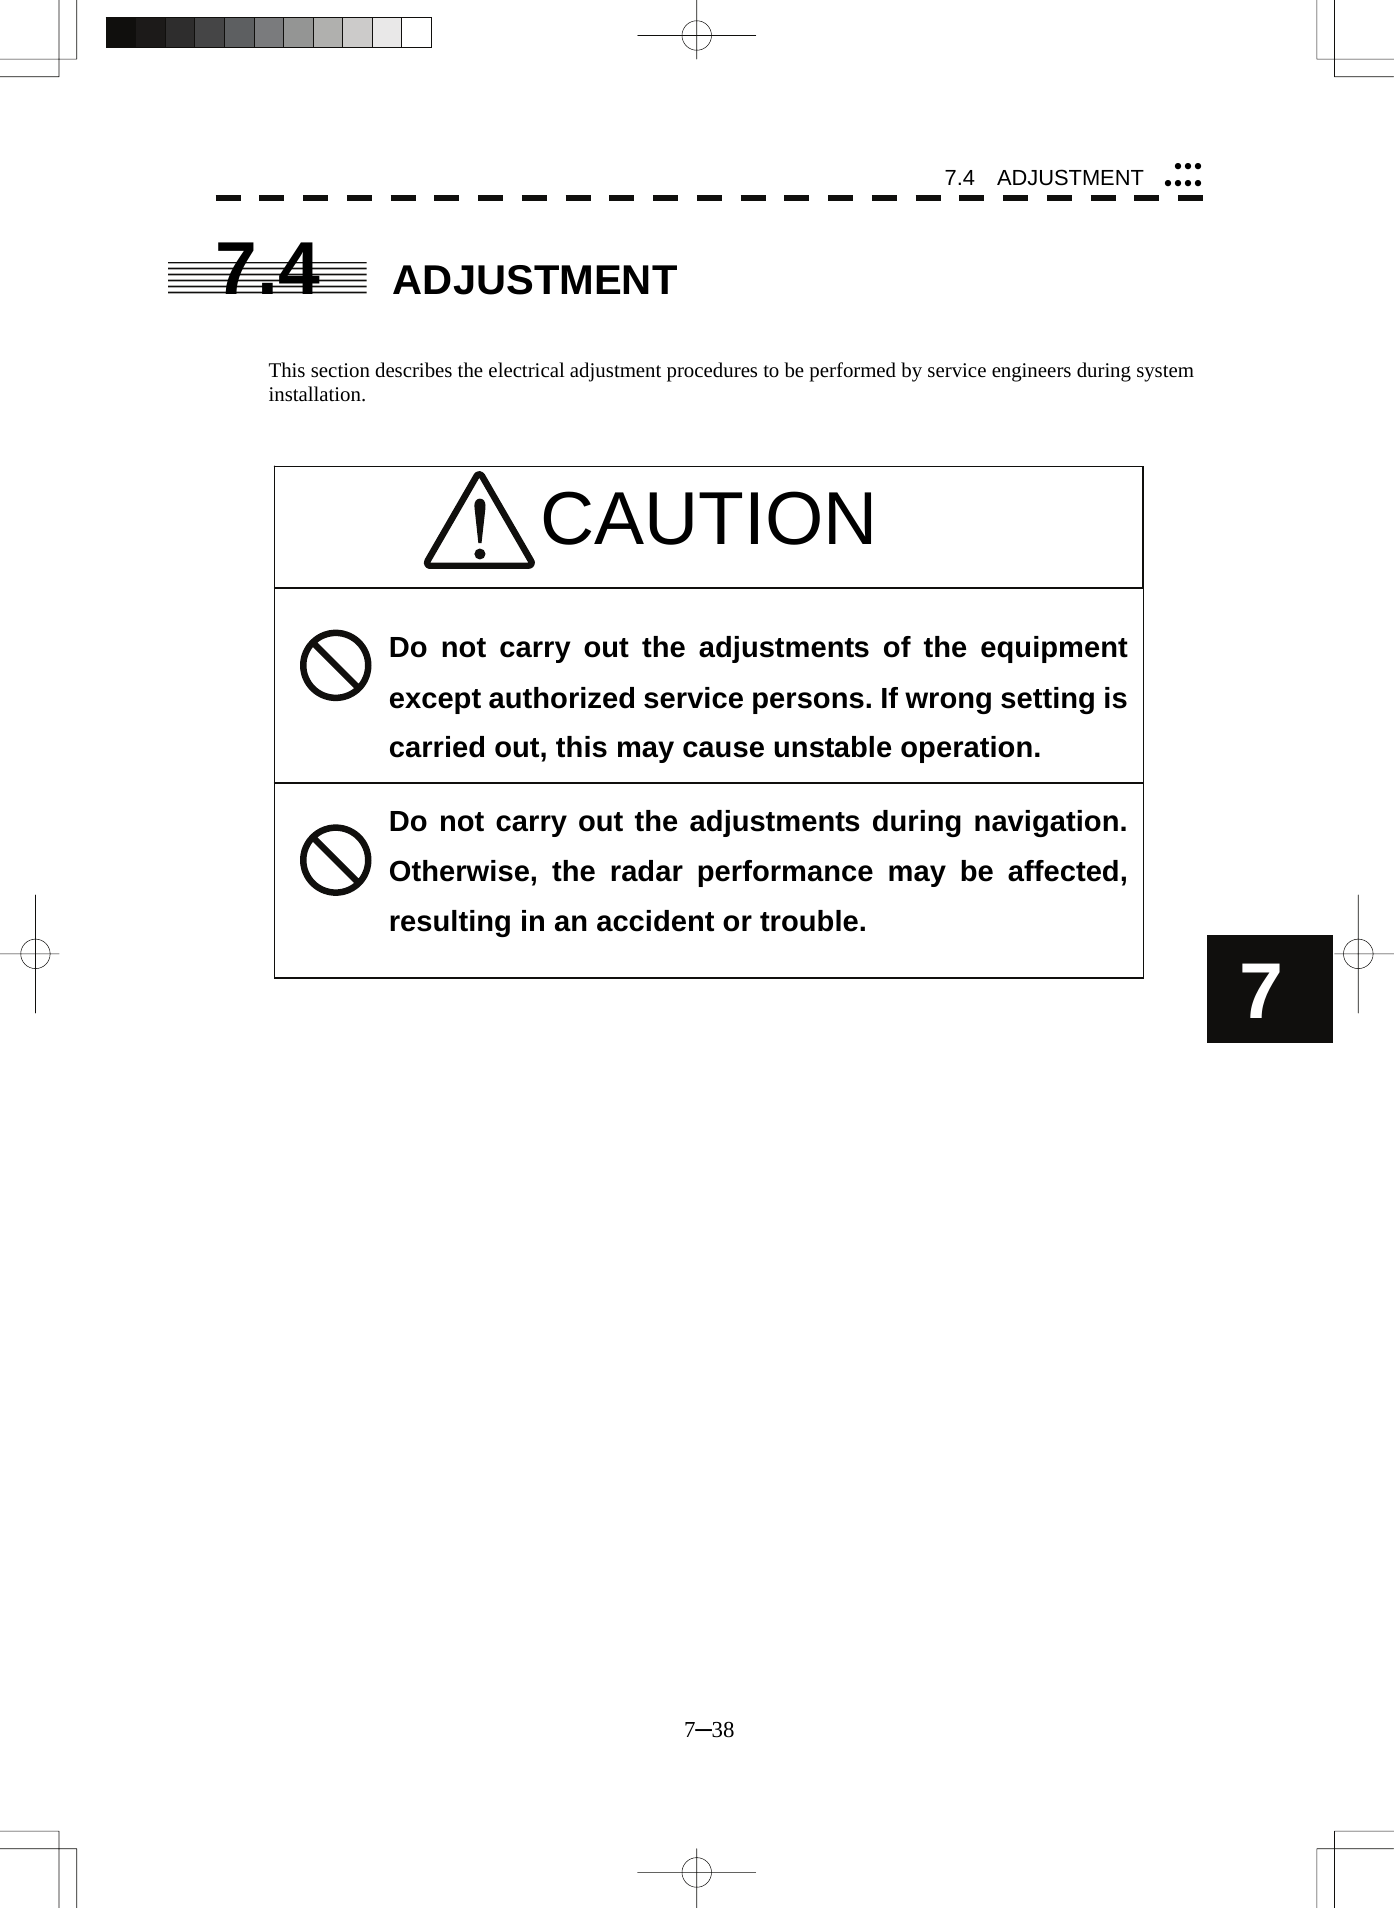 7.4  ADJUSTMENT 7─38 7yyyyyyyCAUTION 7.4 ADJUSTMENT   This section describes the electrical adjustment procedures to be performed by service engineers during system installation.                              Do not carry out the adjustments of the equipment except authorized service persons. If wrong setting is carried out, this may cause unstable operation. Do not carry out the adjustments during navigation. Otherwise, the radar performance may be affected, resulting in an accident or trouble.  